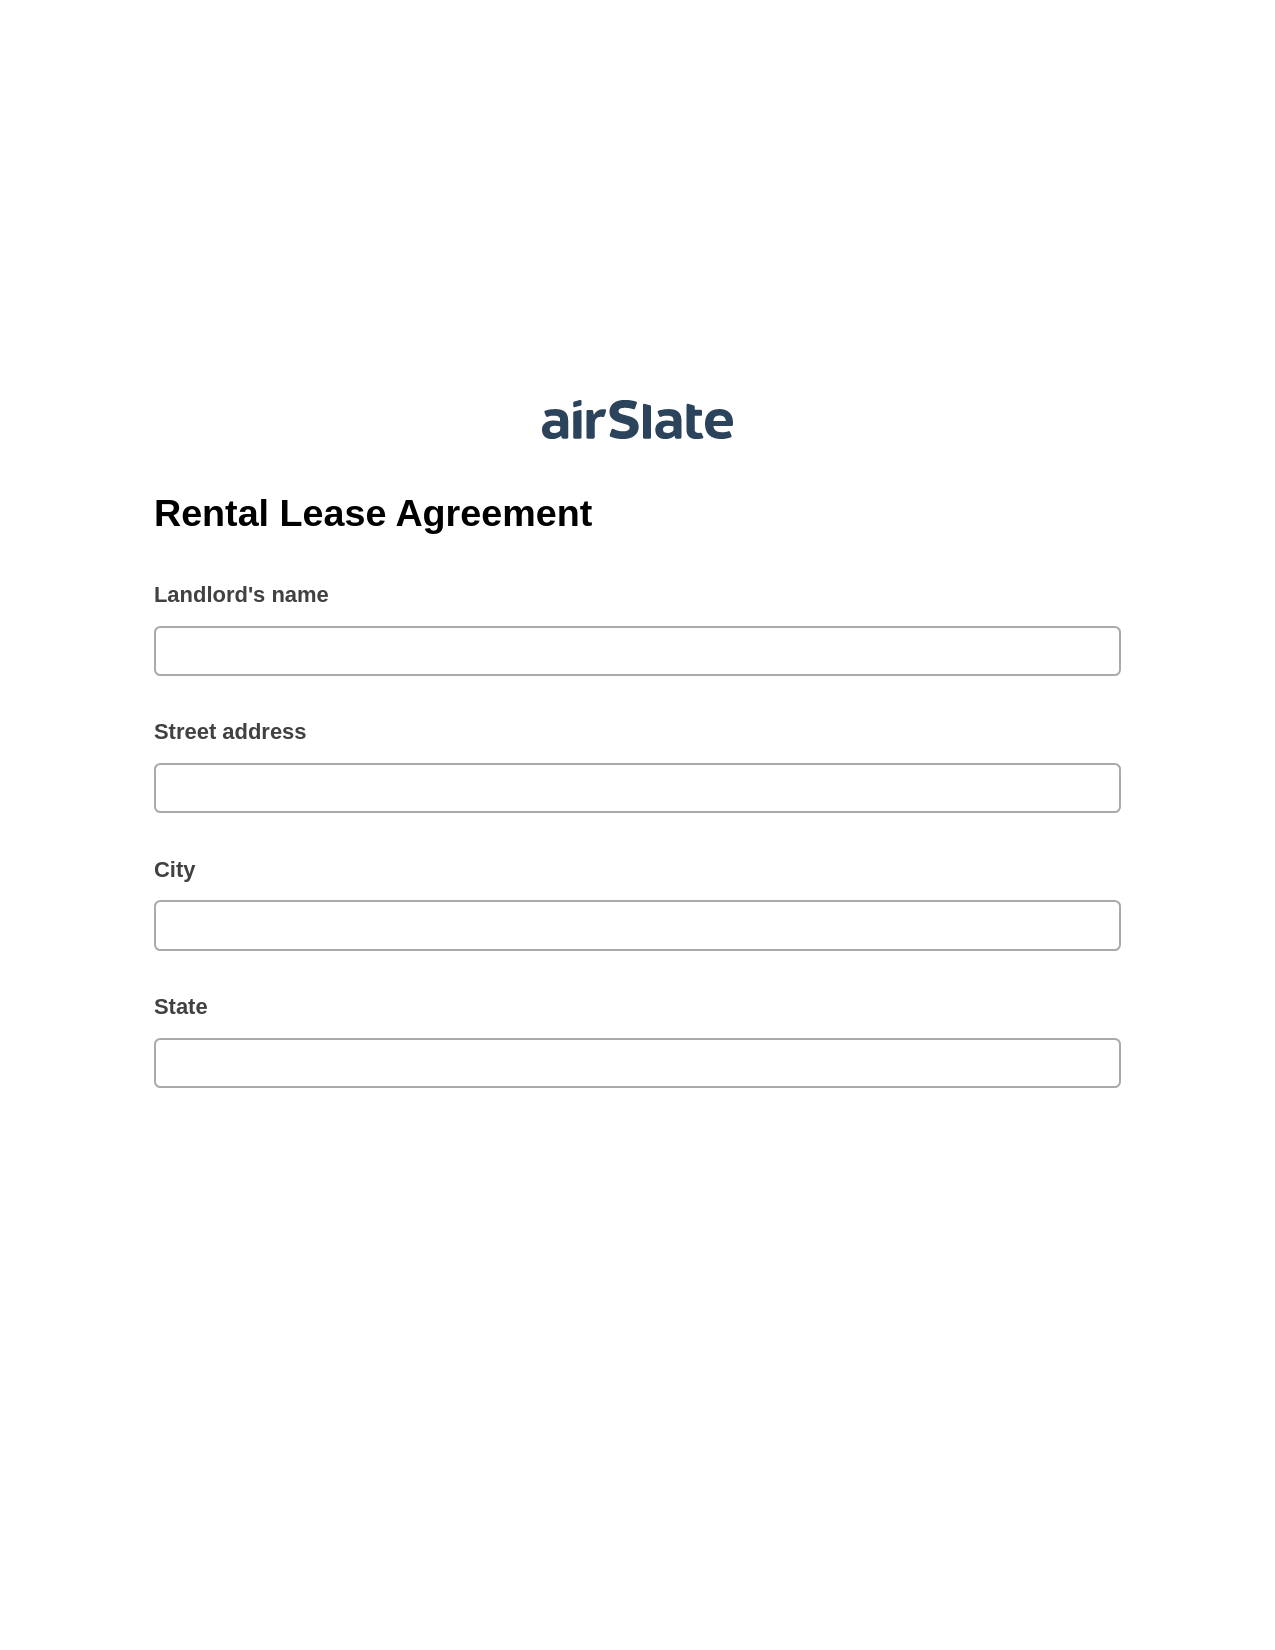 Rental Lease Agreement Pre-fill Dropdown from Airtable, Open as Role Bot, Export to Google Sheet Bot